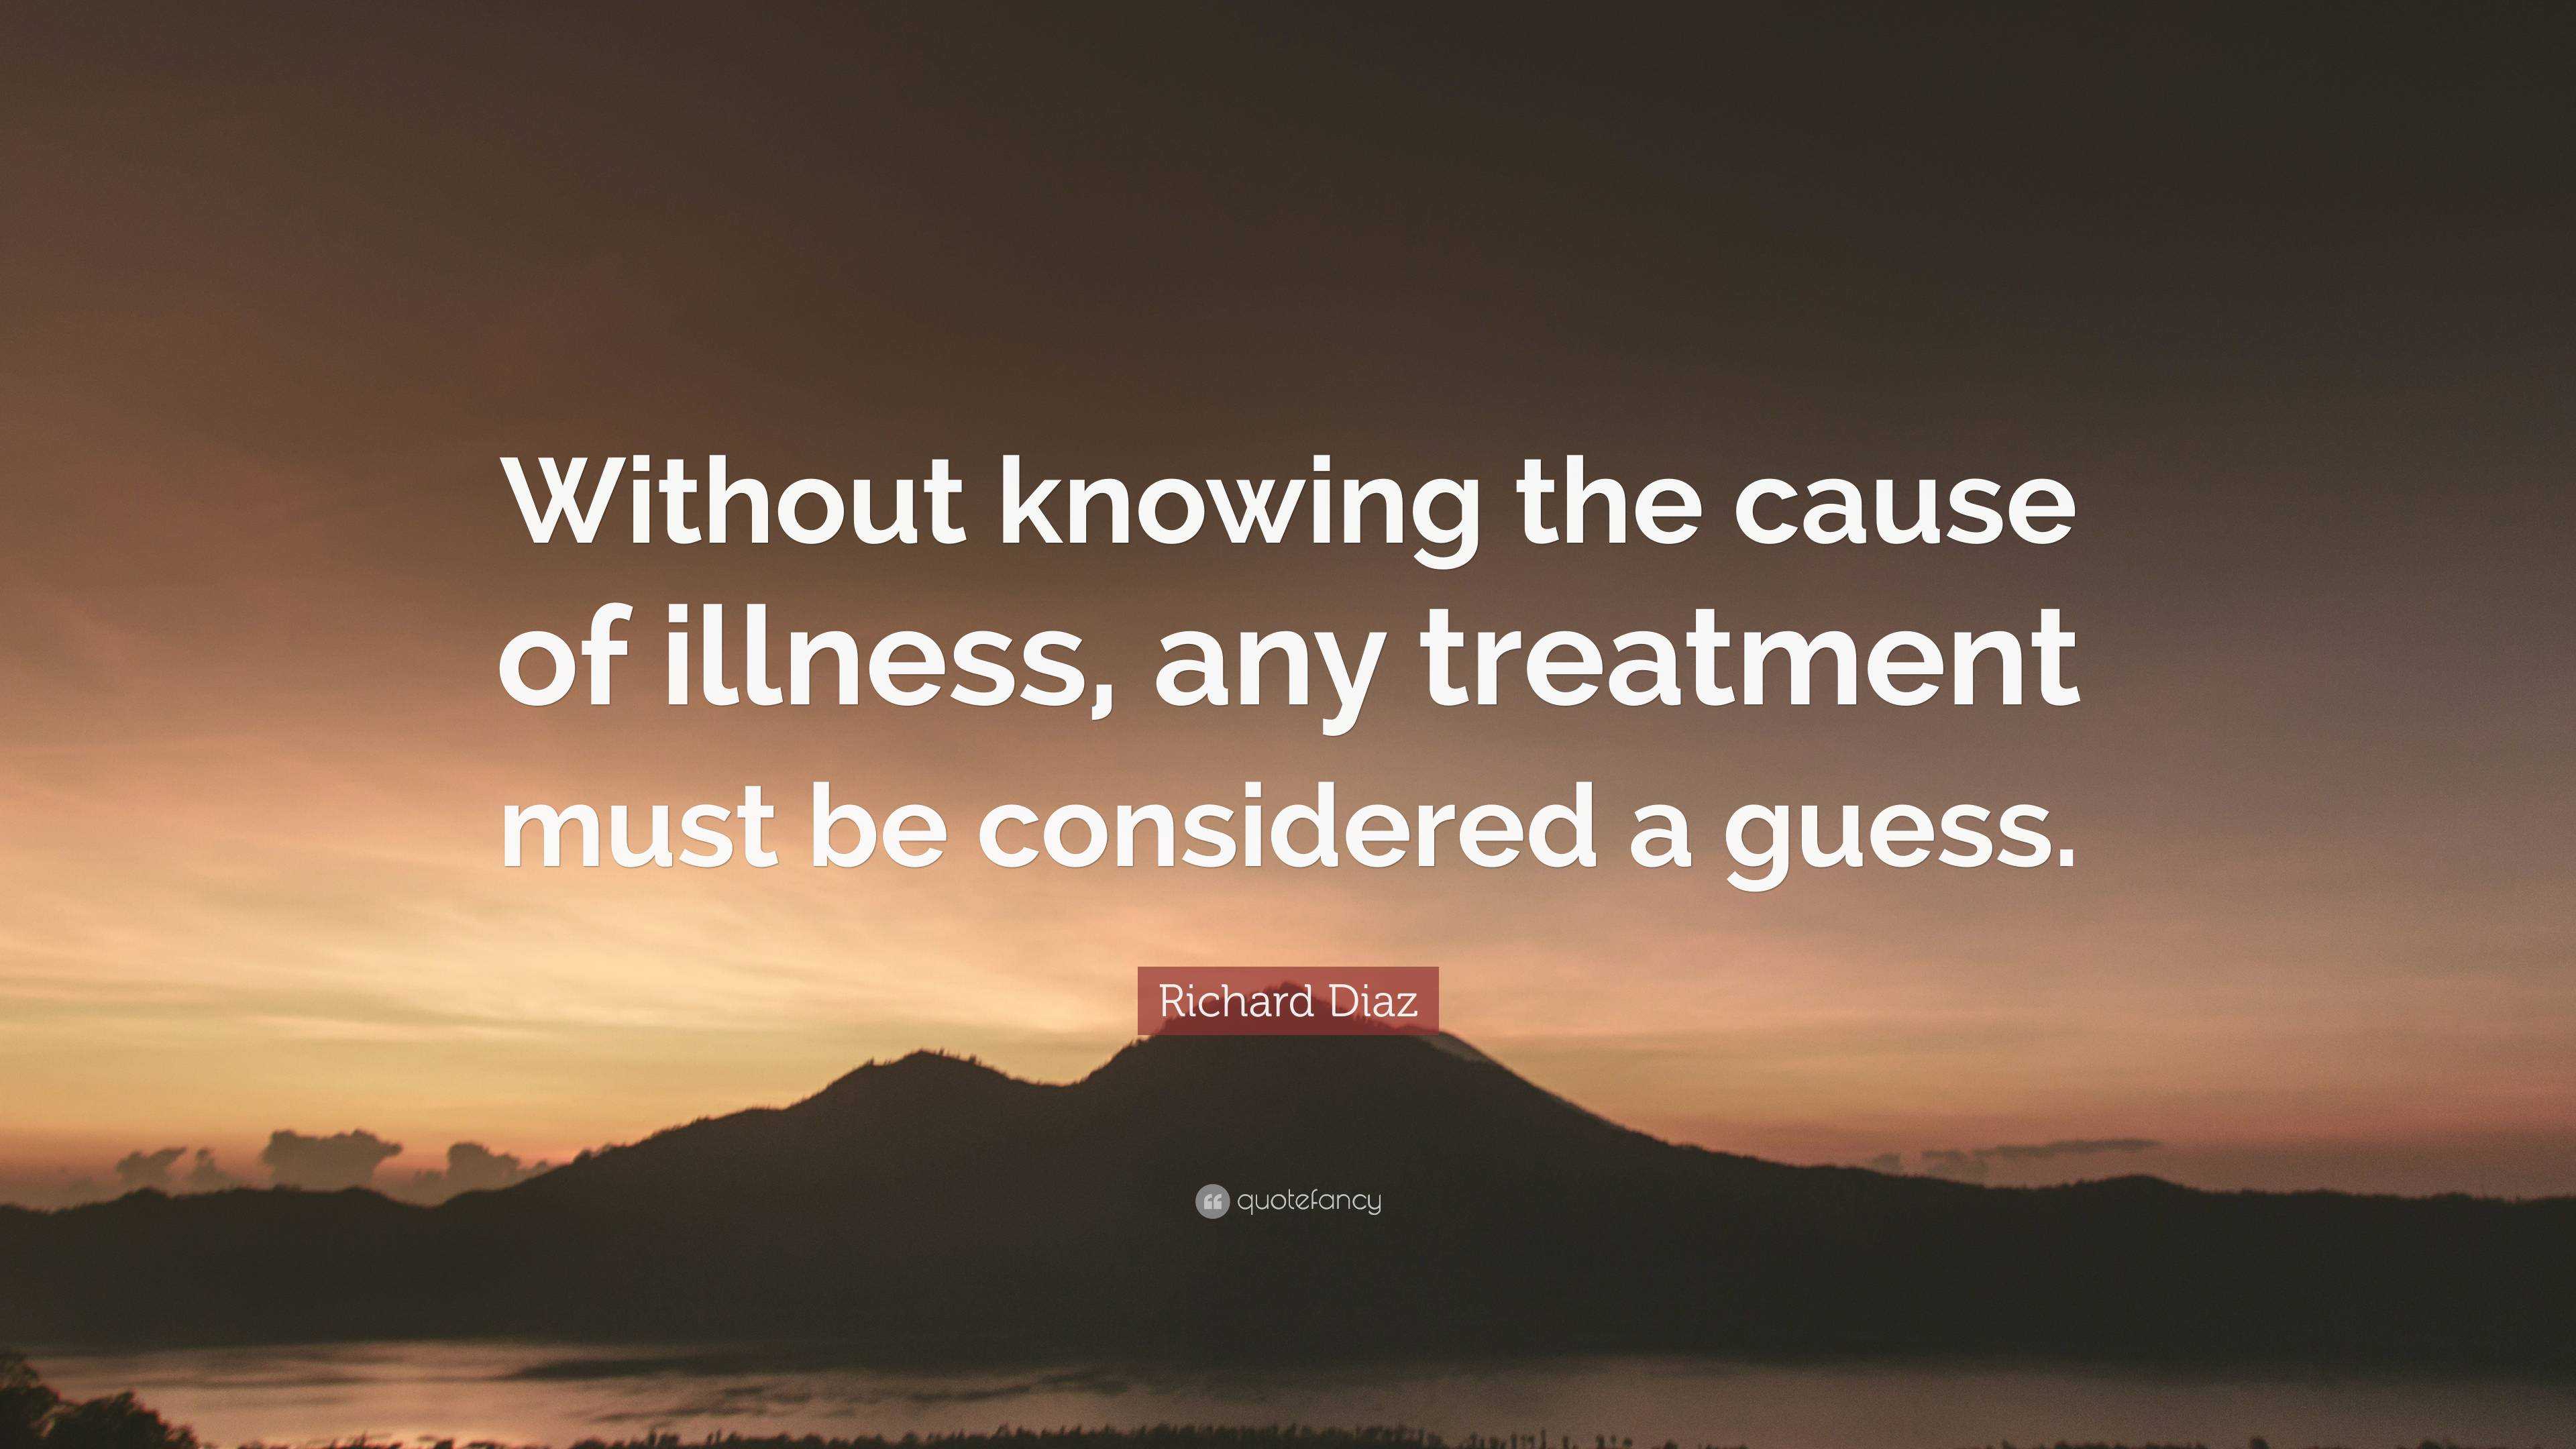 Richard Diaz Quote: the of illness, any must be considered a guess.”